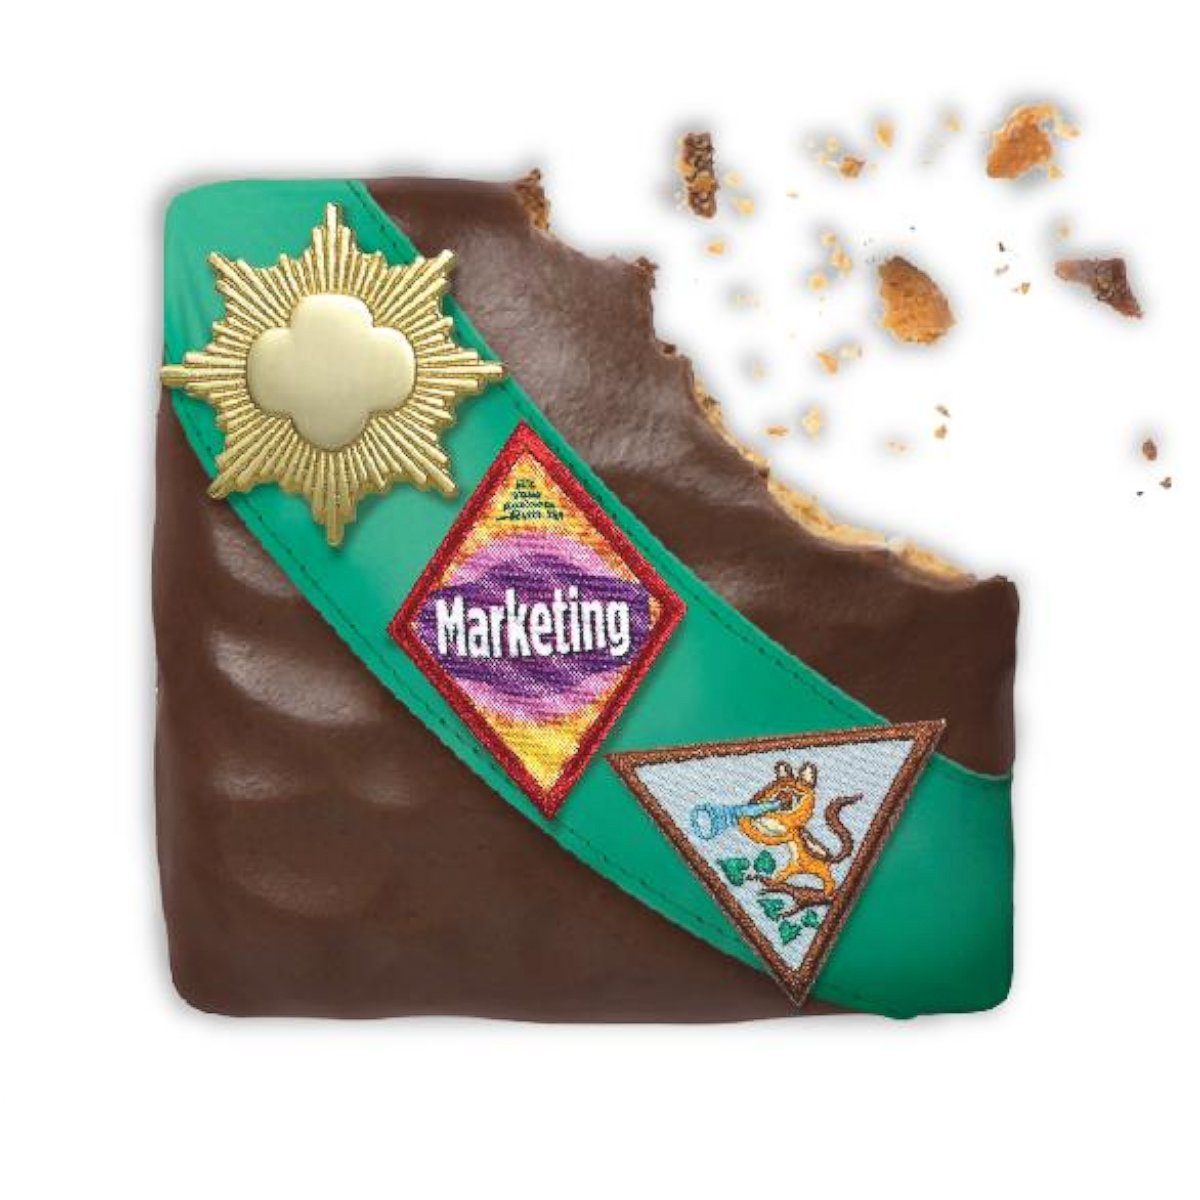 PHOTO: The Girl Scouts are introducing a s'mores-inspired cookie made of a crispy graham cookie dipped in a creme icing and covered in chocolate.